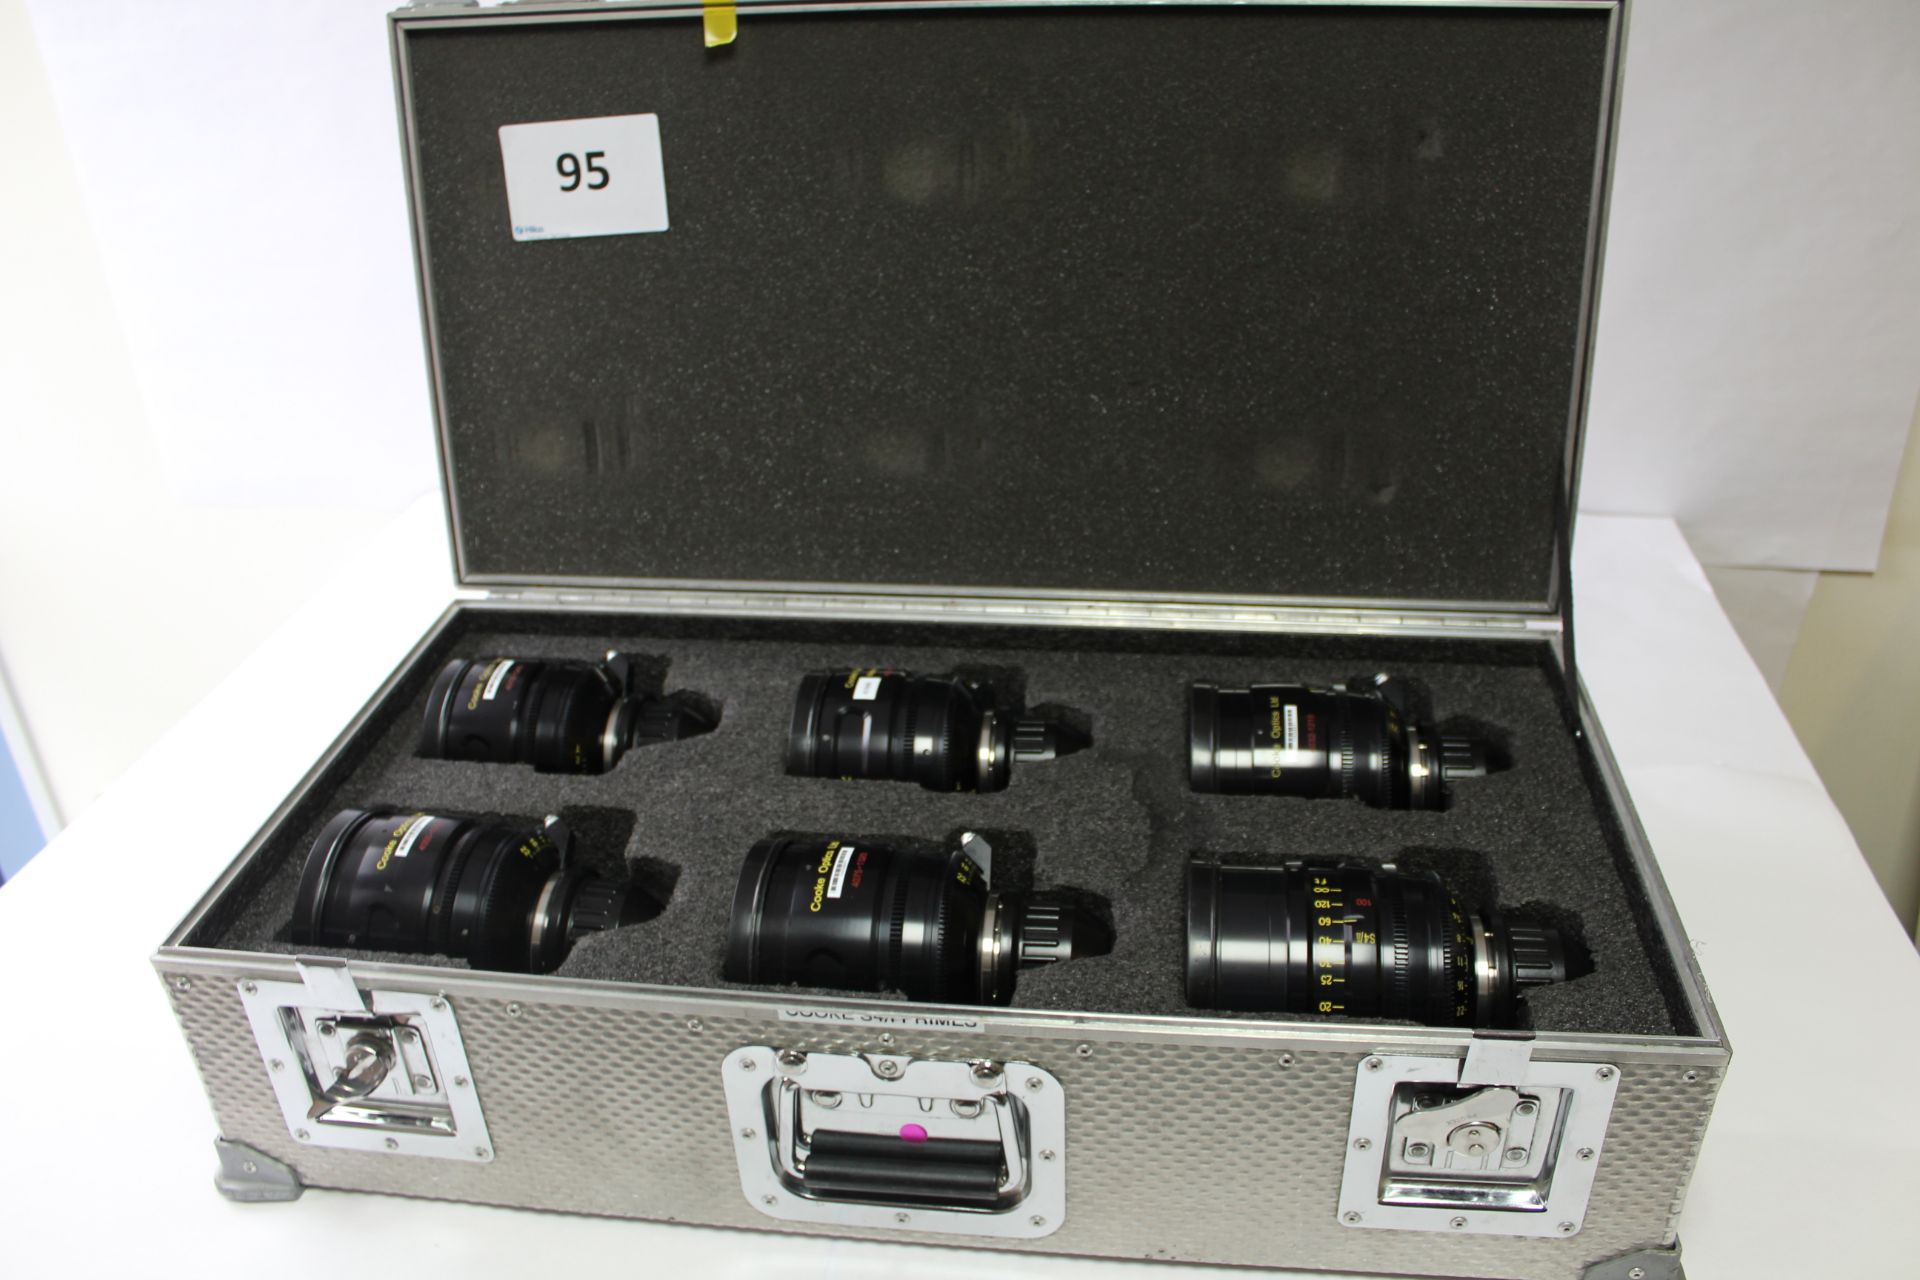 Cooke S4/i Prime Lens set of 6 Consisting of 100mm, 75mm, 50mm, 32mm, 25mm and 18mm Prime Lenses w